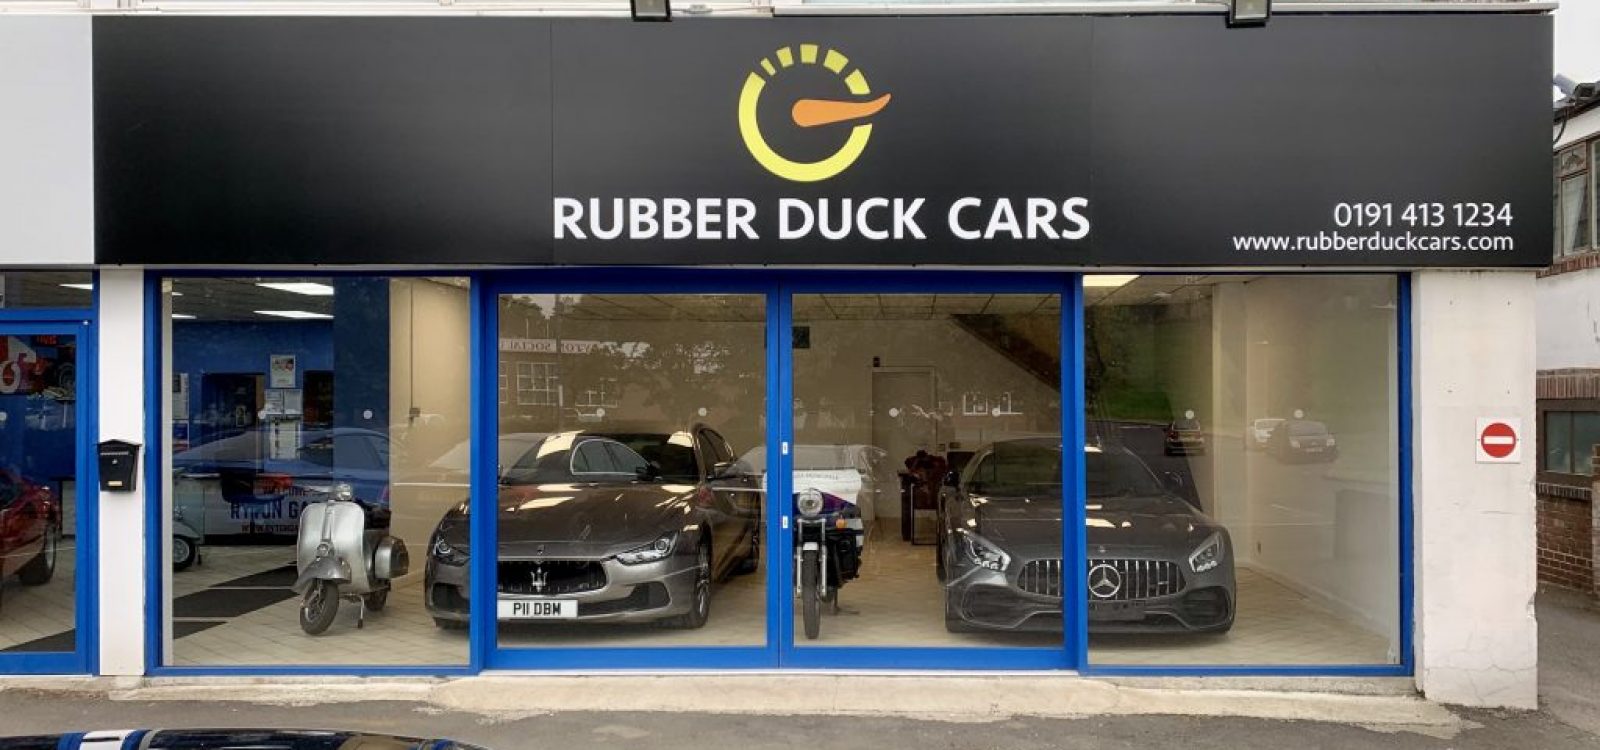 Rubber-Duck-Cars-1024x697